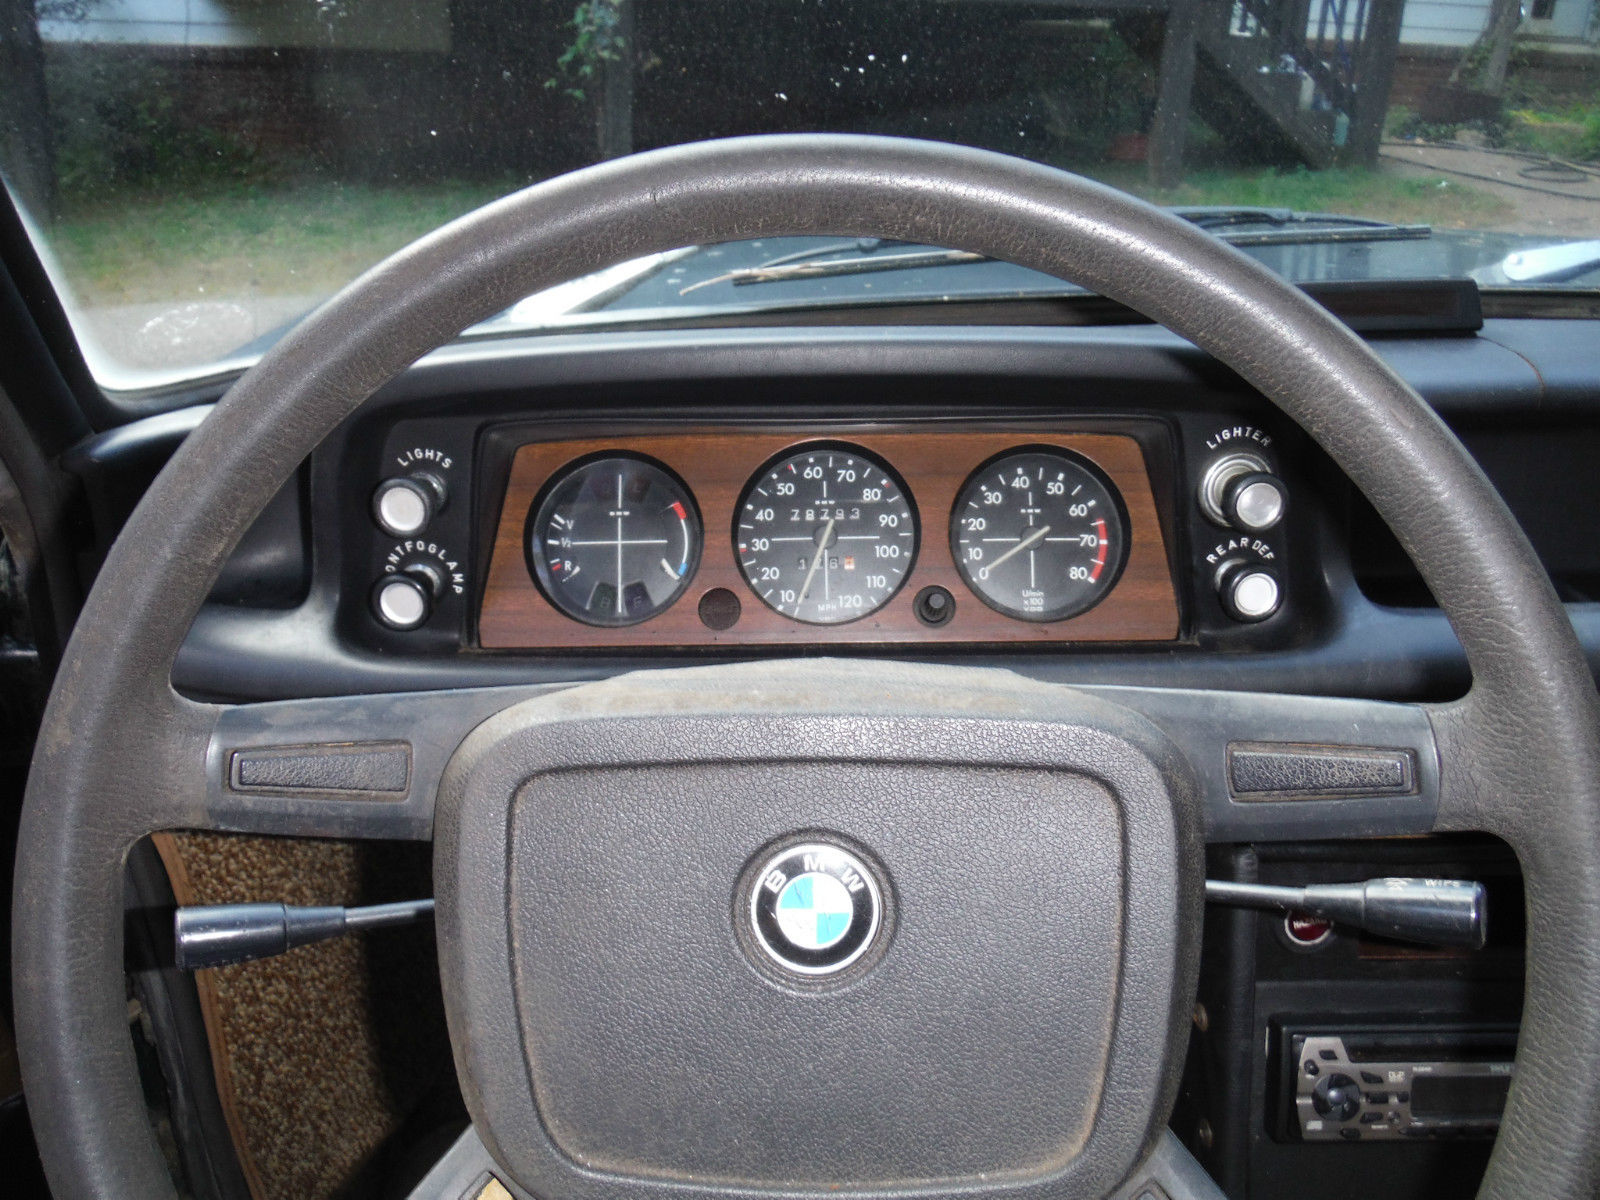 1976 BMW 2002 4-Speed No Sunroof For Parts or Restoration You Decide